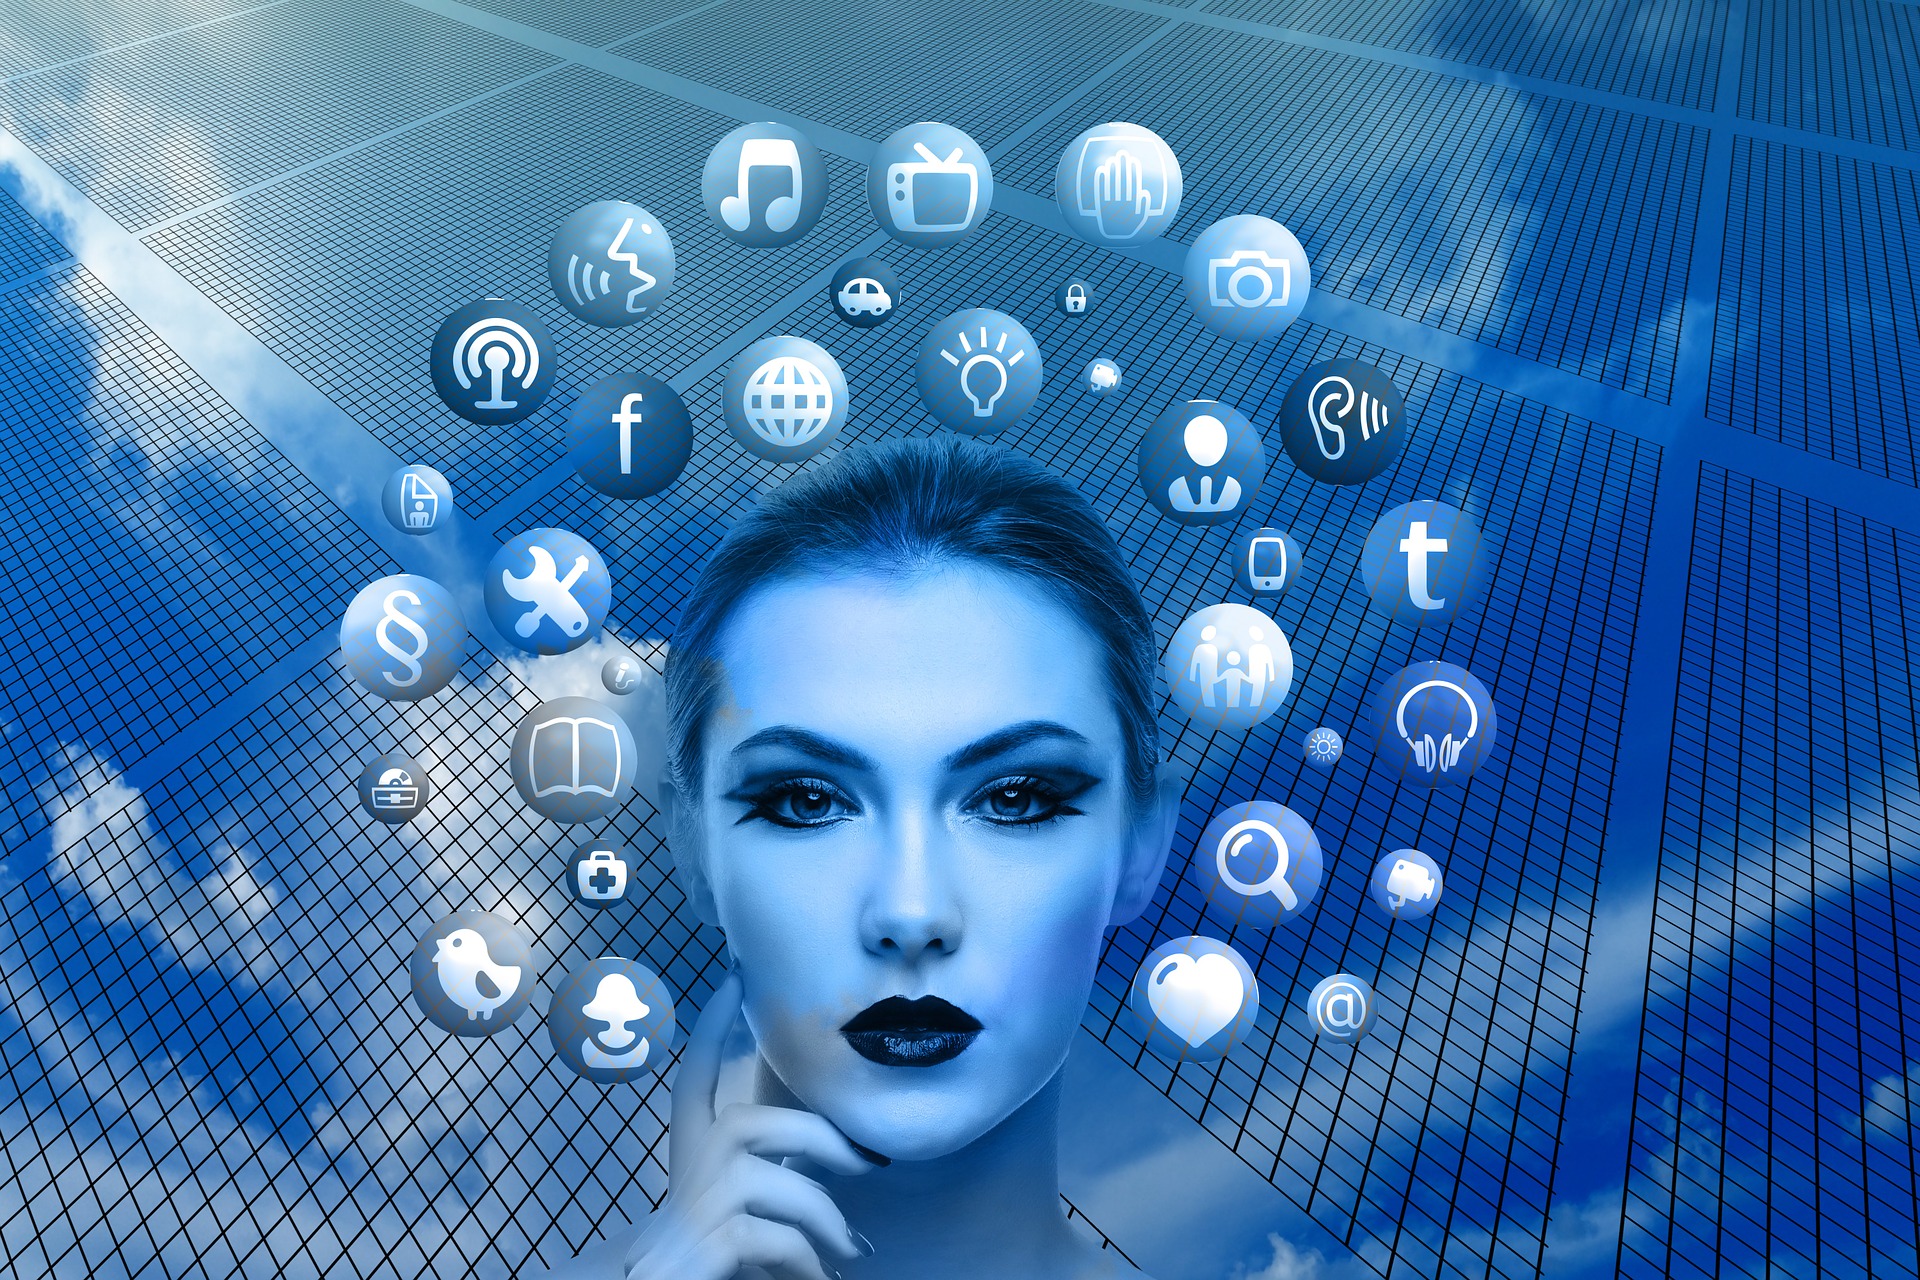 An image of a woman surrounded by icons, published to: "3 Great Email Newsletter Tools for Small Businesses"